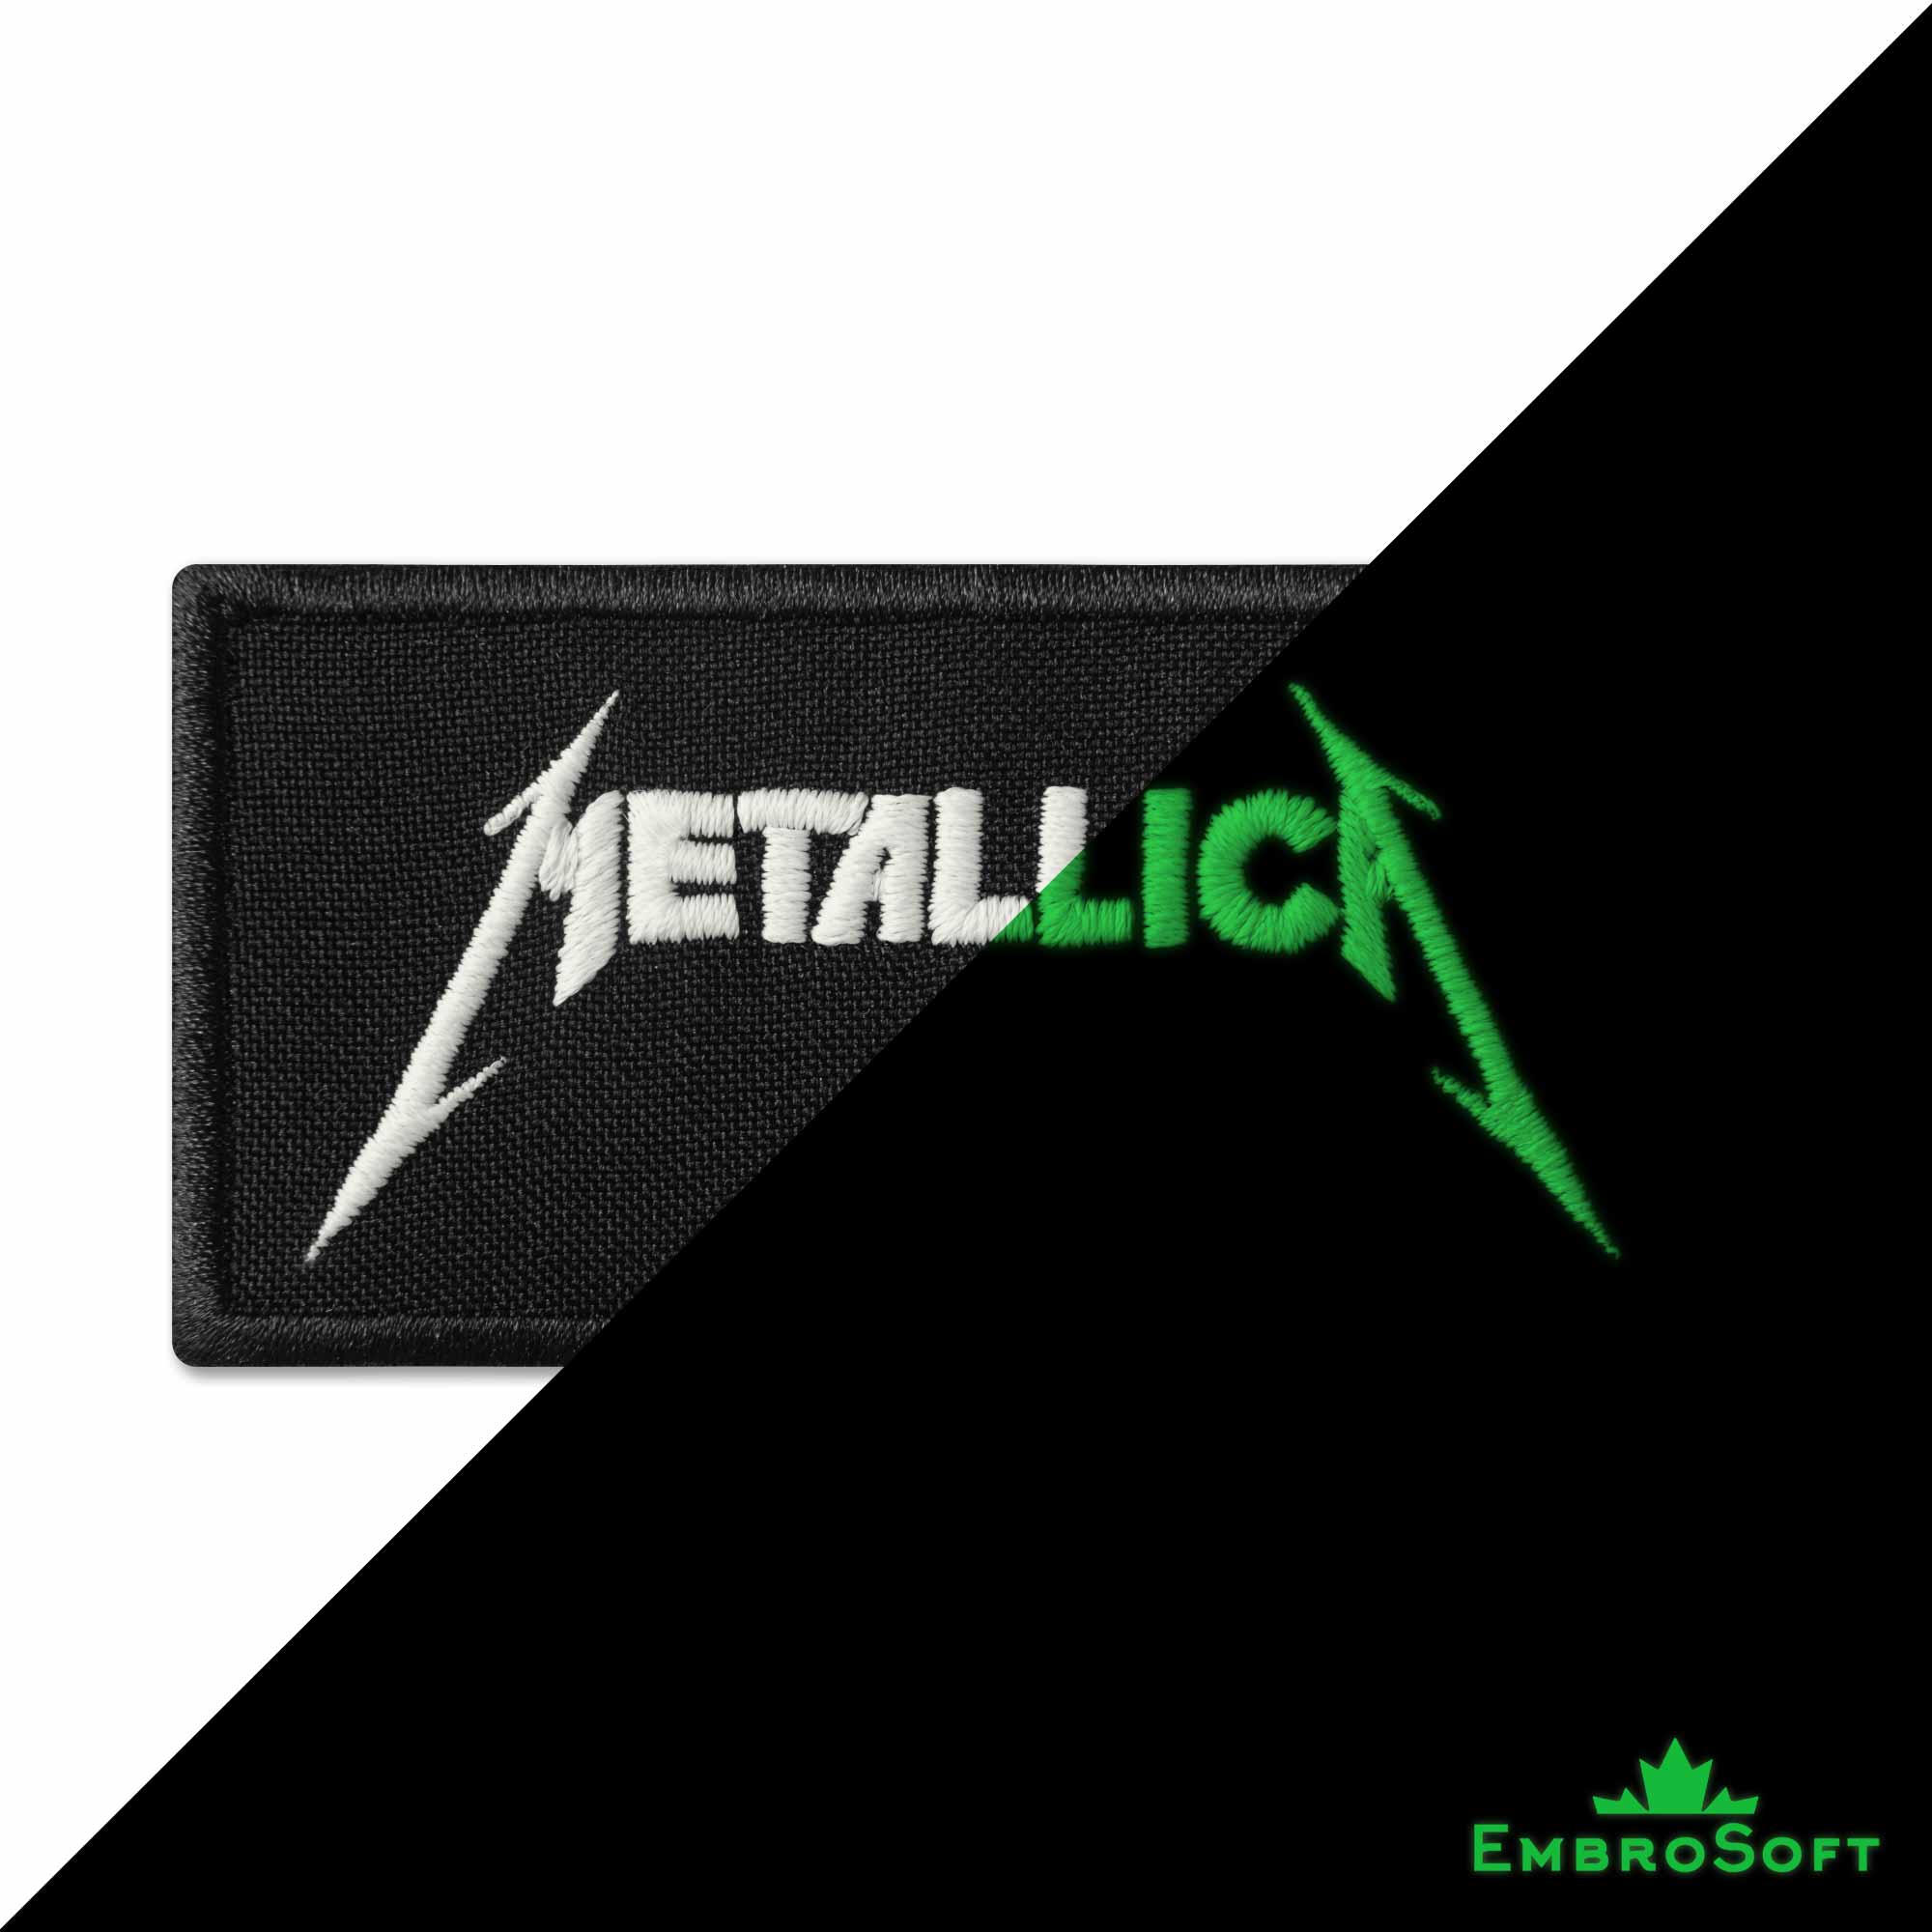 Meticalla Logo - Metallica Logo Embroidered Glowing Patch (3.3 x 1.7)